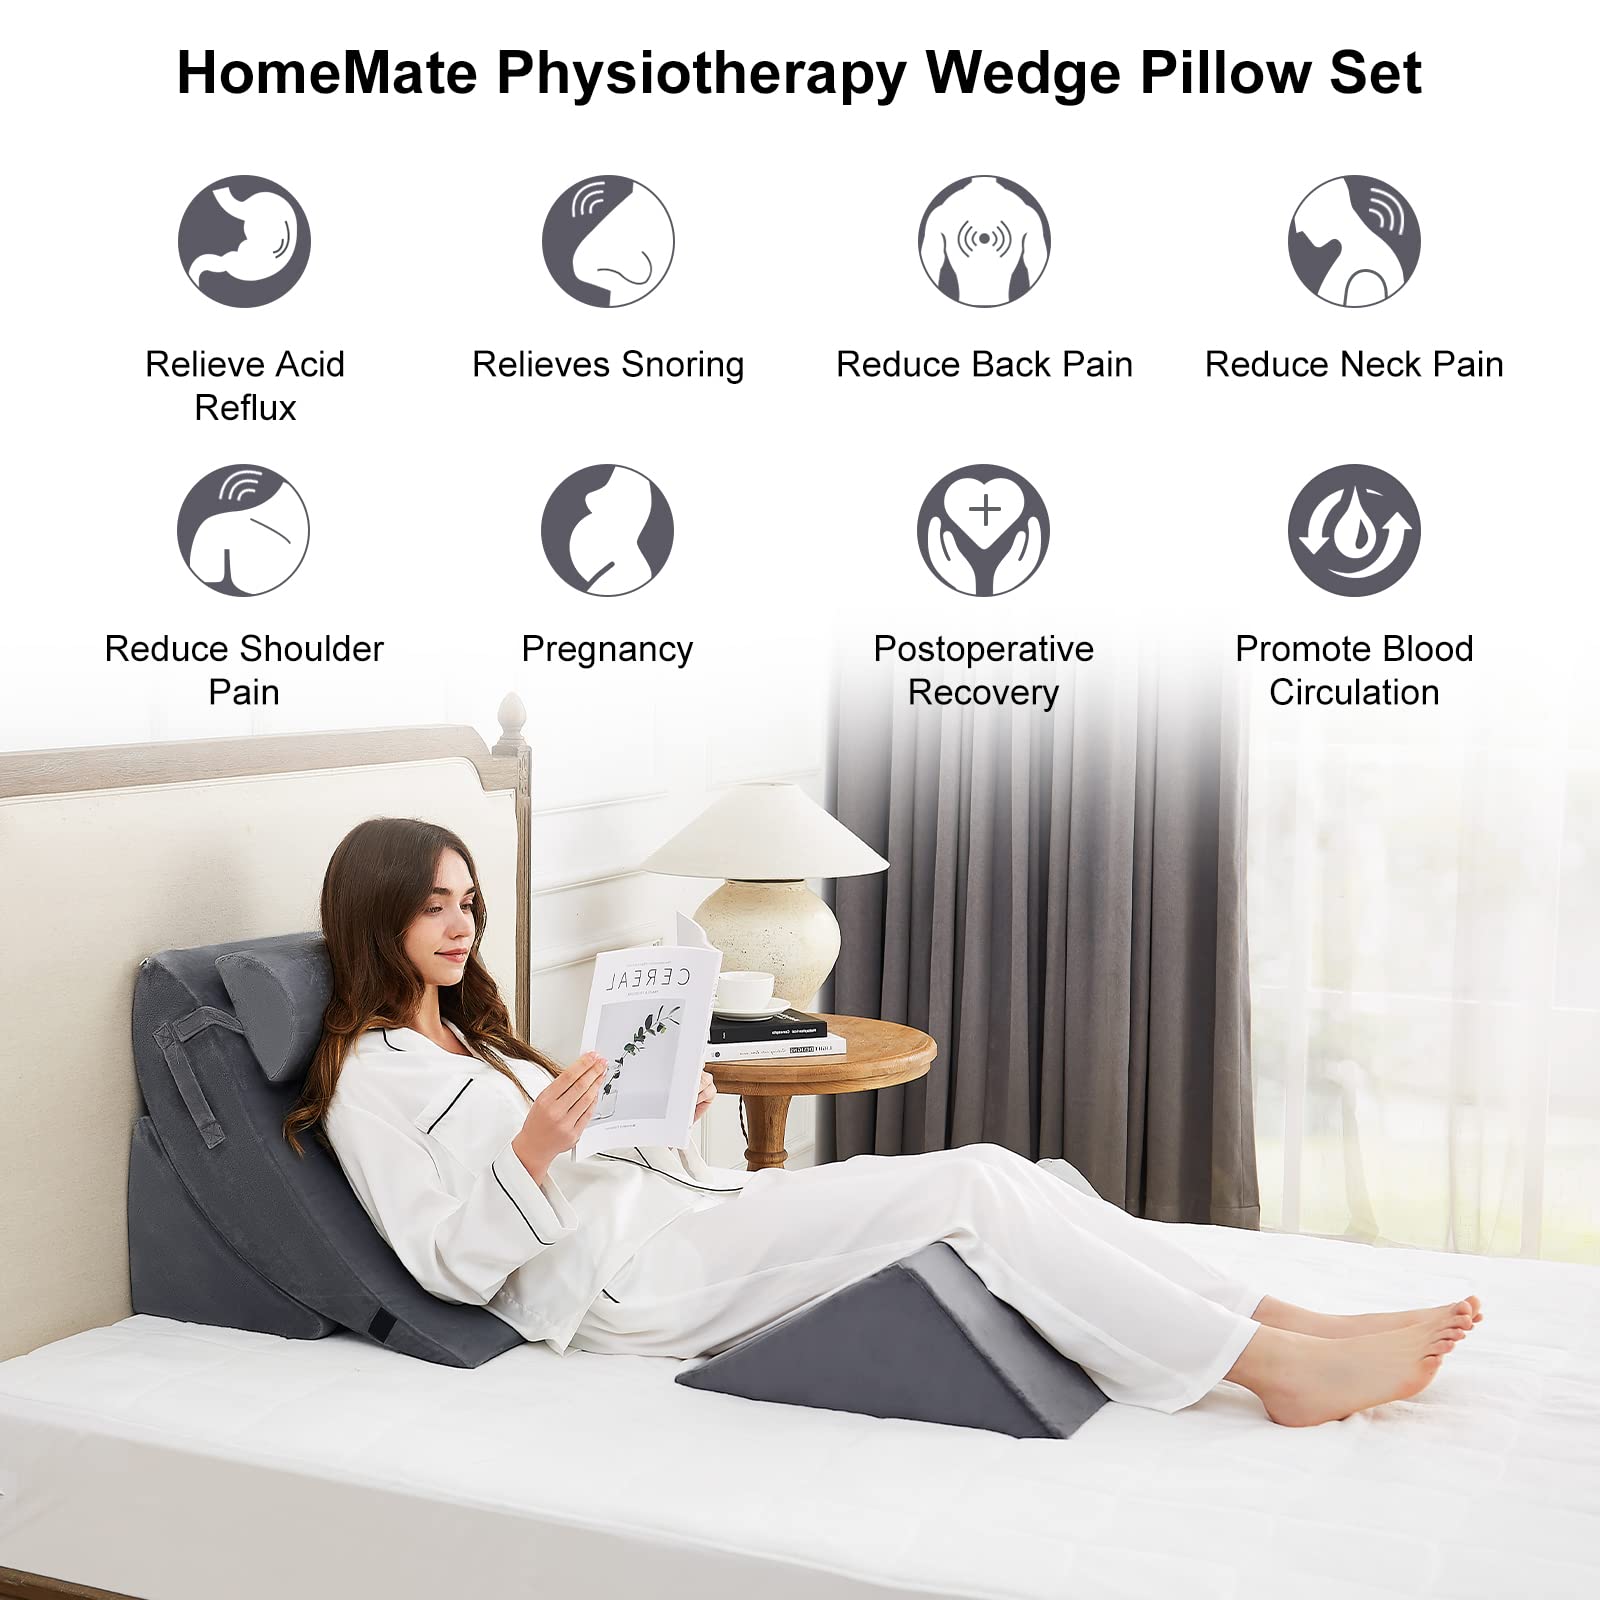 HomeMate 4pcs Orthopedic Bed Wedge Pillow Set, Post Surgery Foam Pillows for Back, Neck and Leg Pain Relief, Adjustable Wedge Pillow for Sleeping-Acid Reflux,Anti Snoring, Heartburn & GERD Sleeping